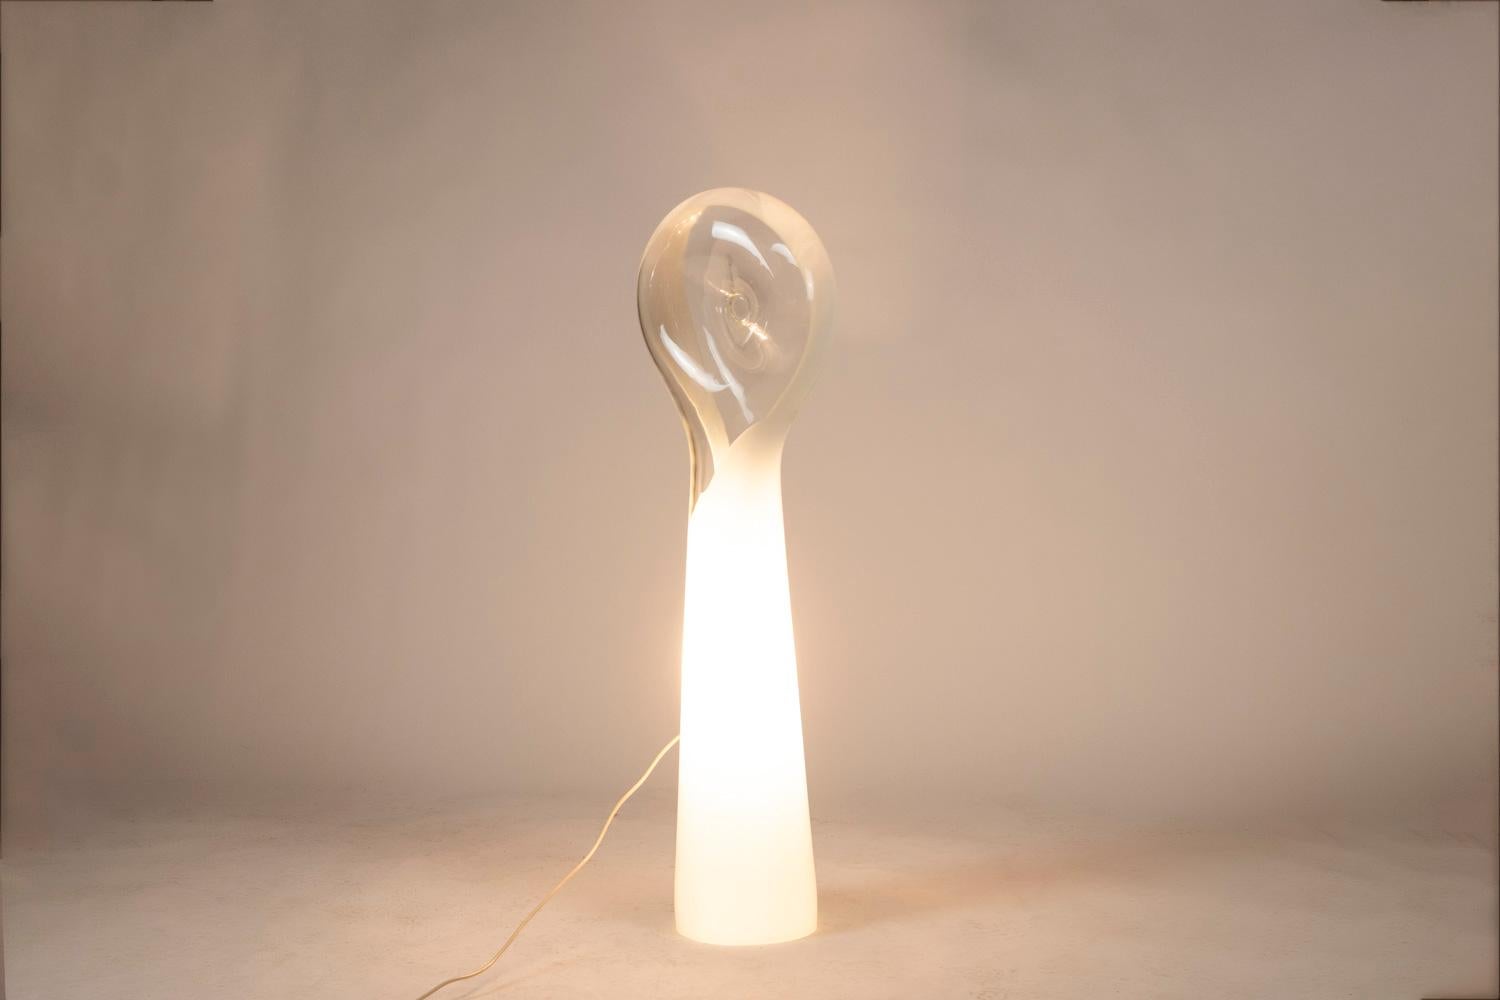 Lino Tagliapietra, by.

Murano glass lamp with a white and transparent color gradient.

Italian work realized in the 1970s.